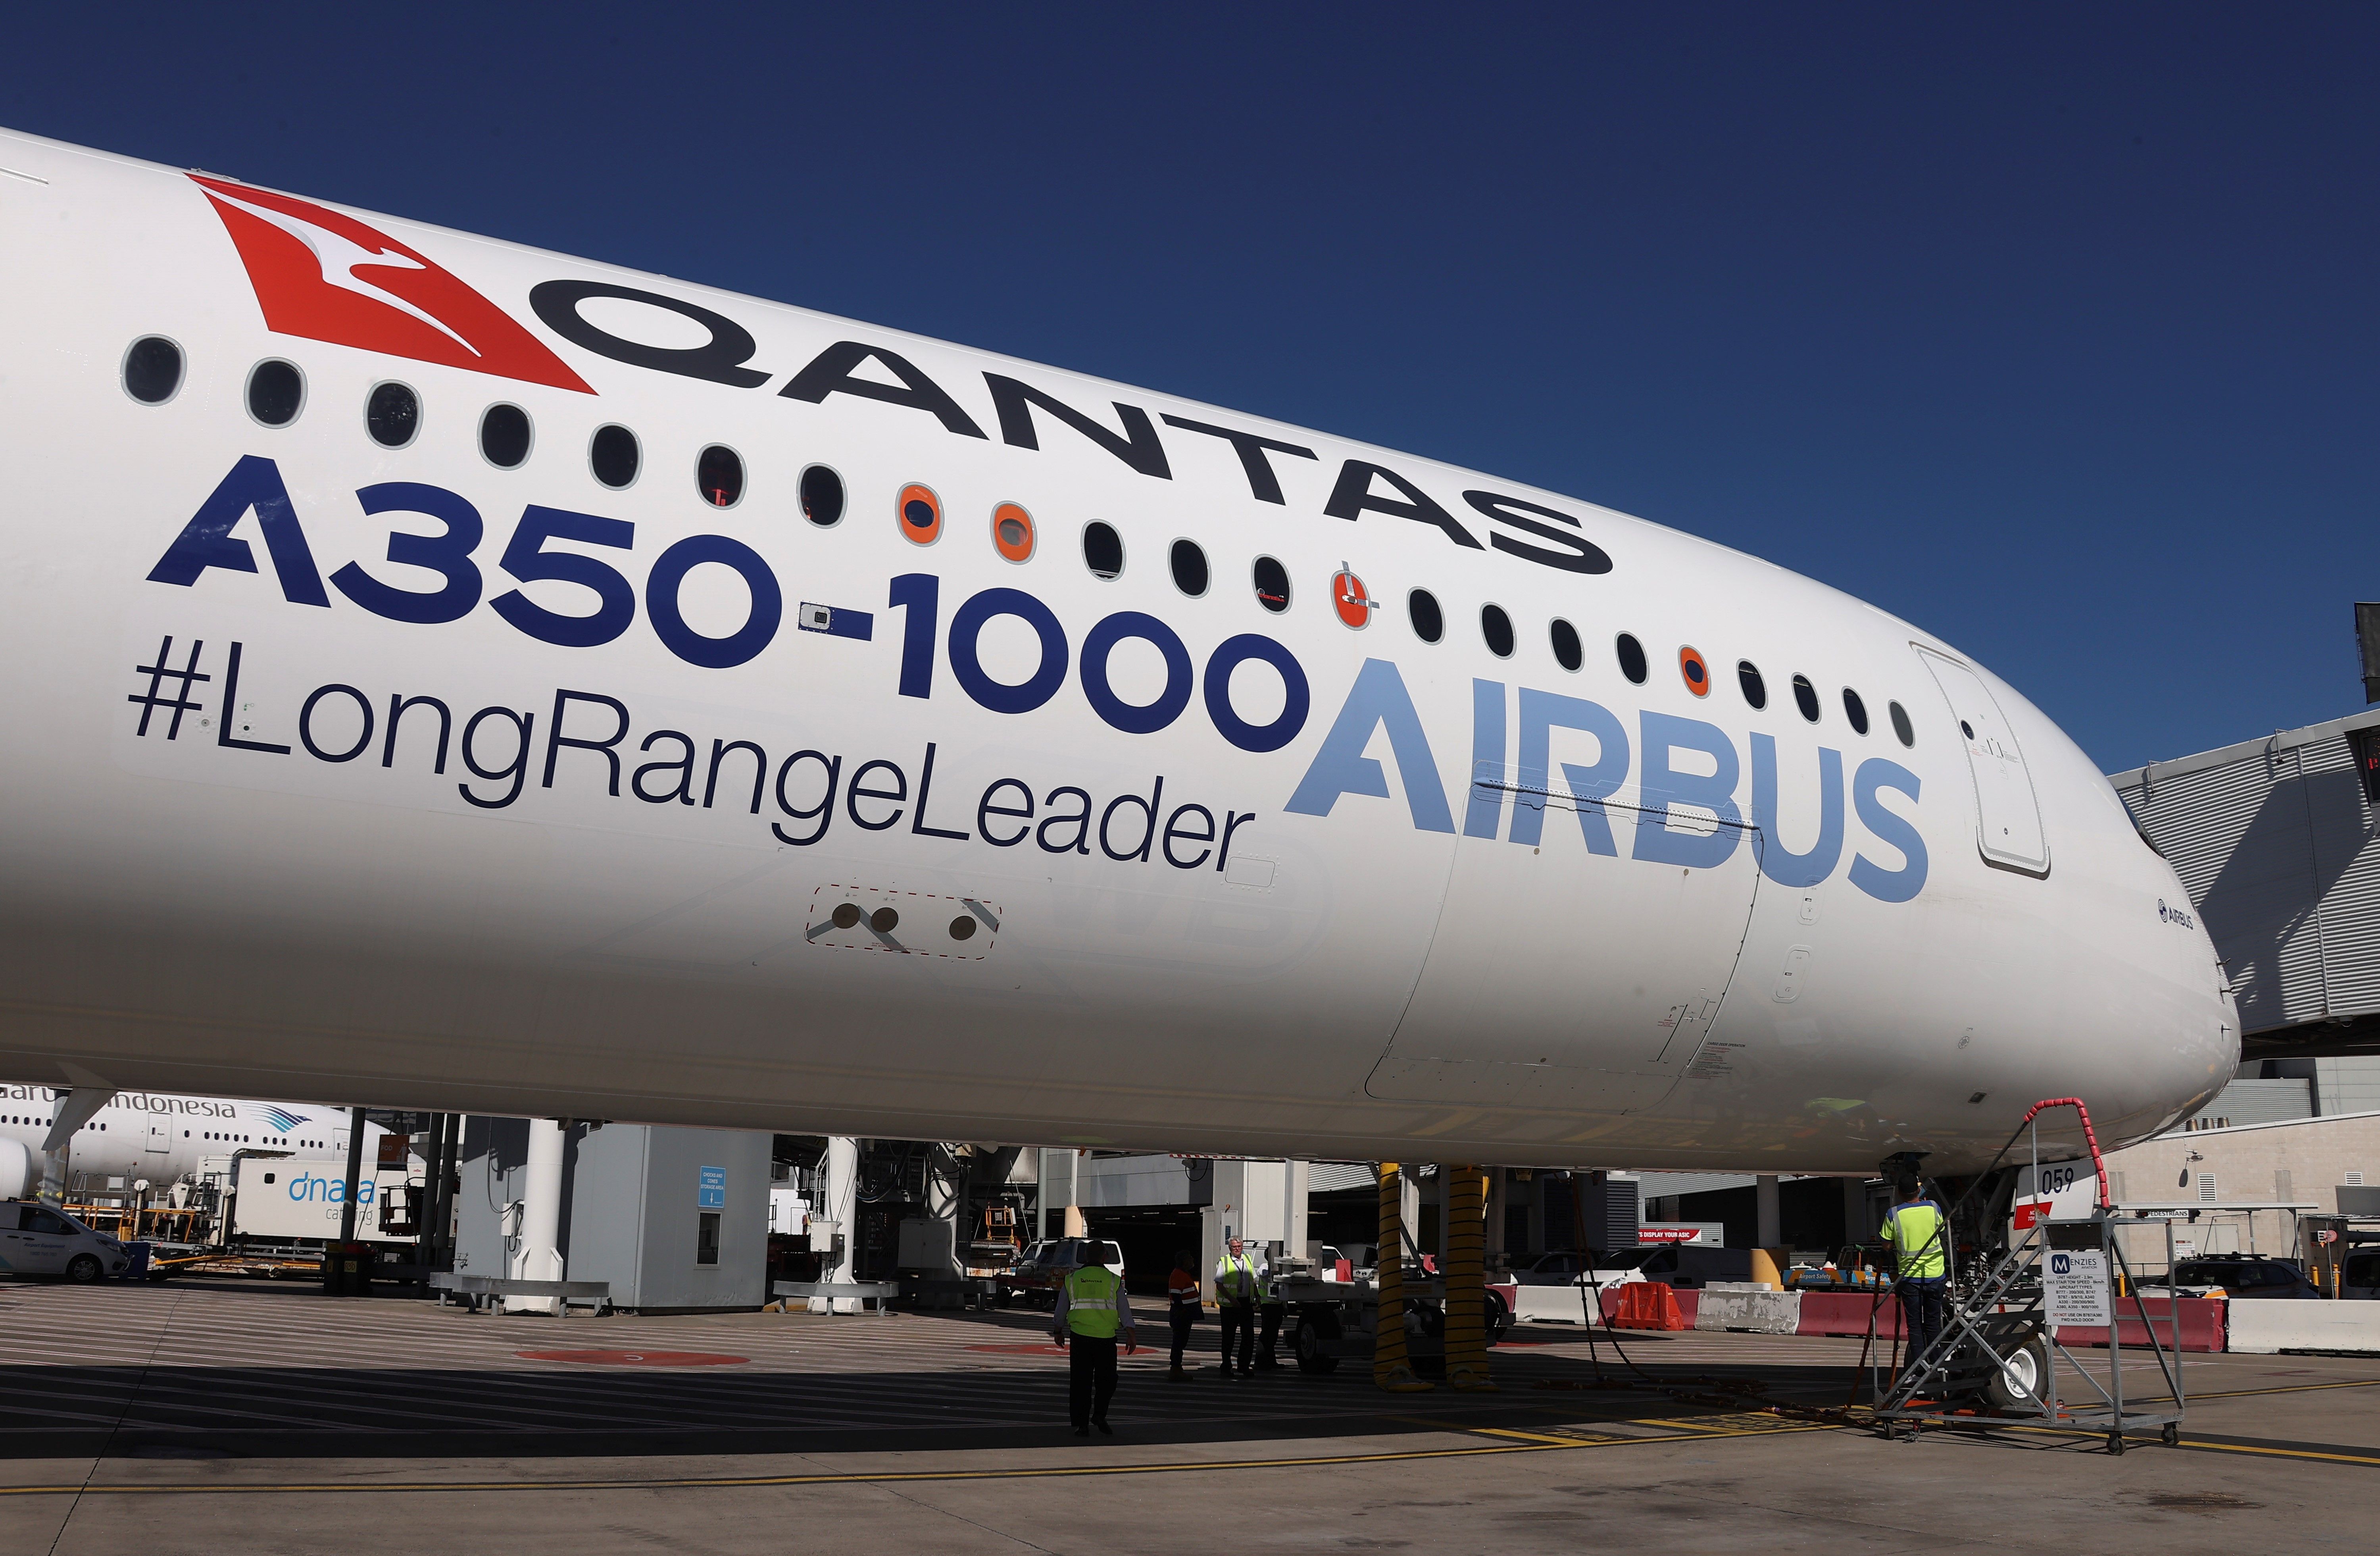 A Qantas Airbus A350-1000 parked on an airport apron.